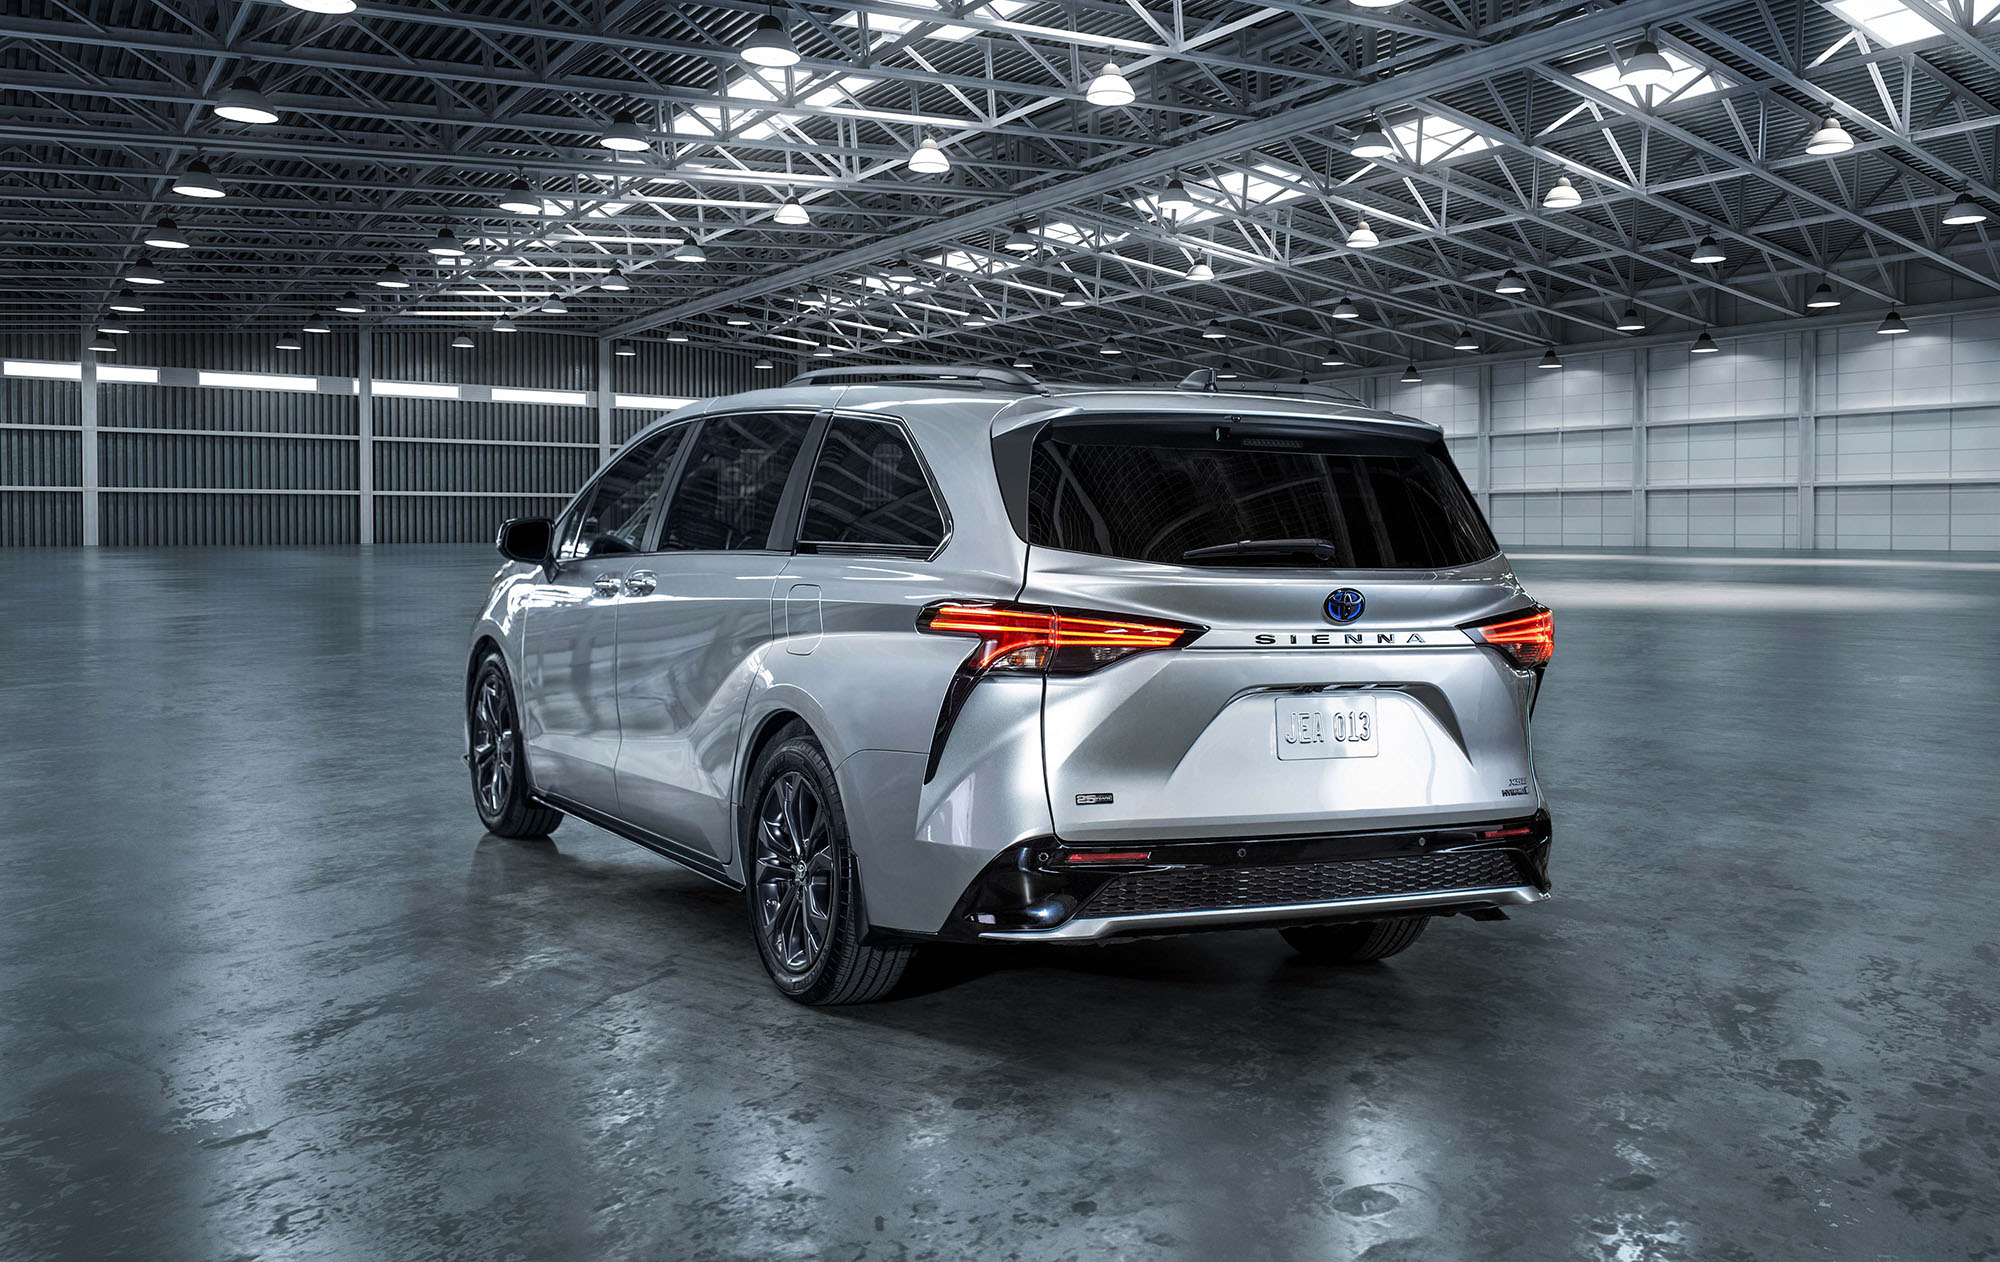 2023 Toyota Sienna 25th Anniversary Special Edition in Celestial Silver, rear